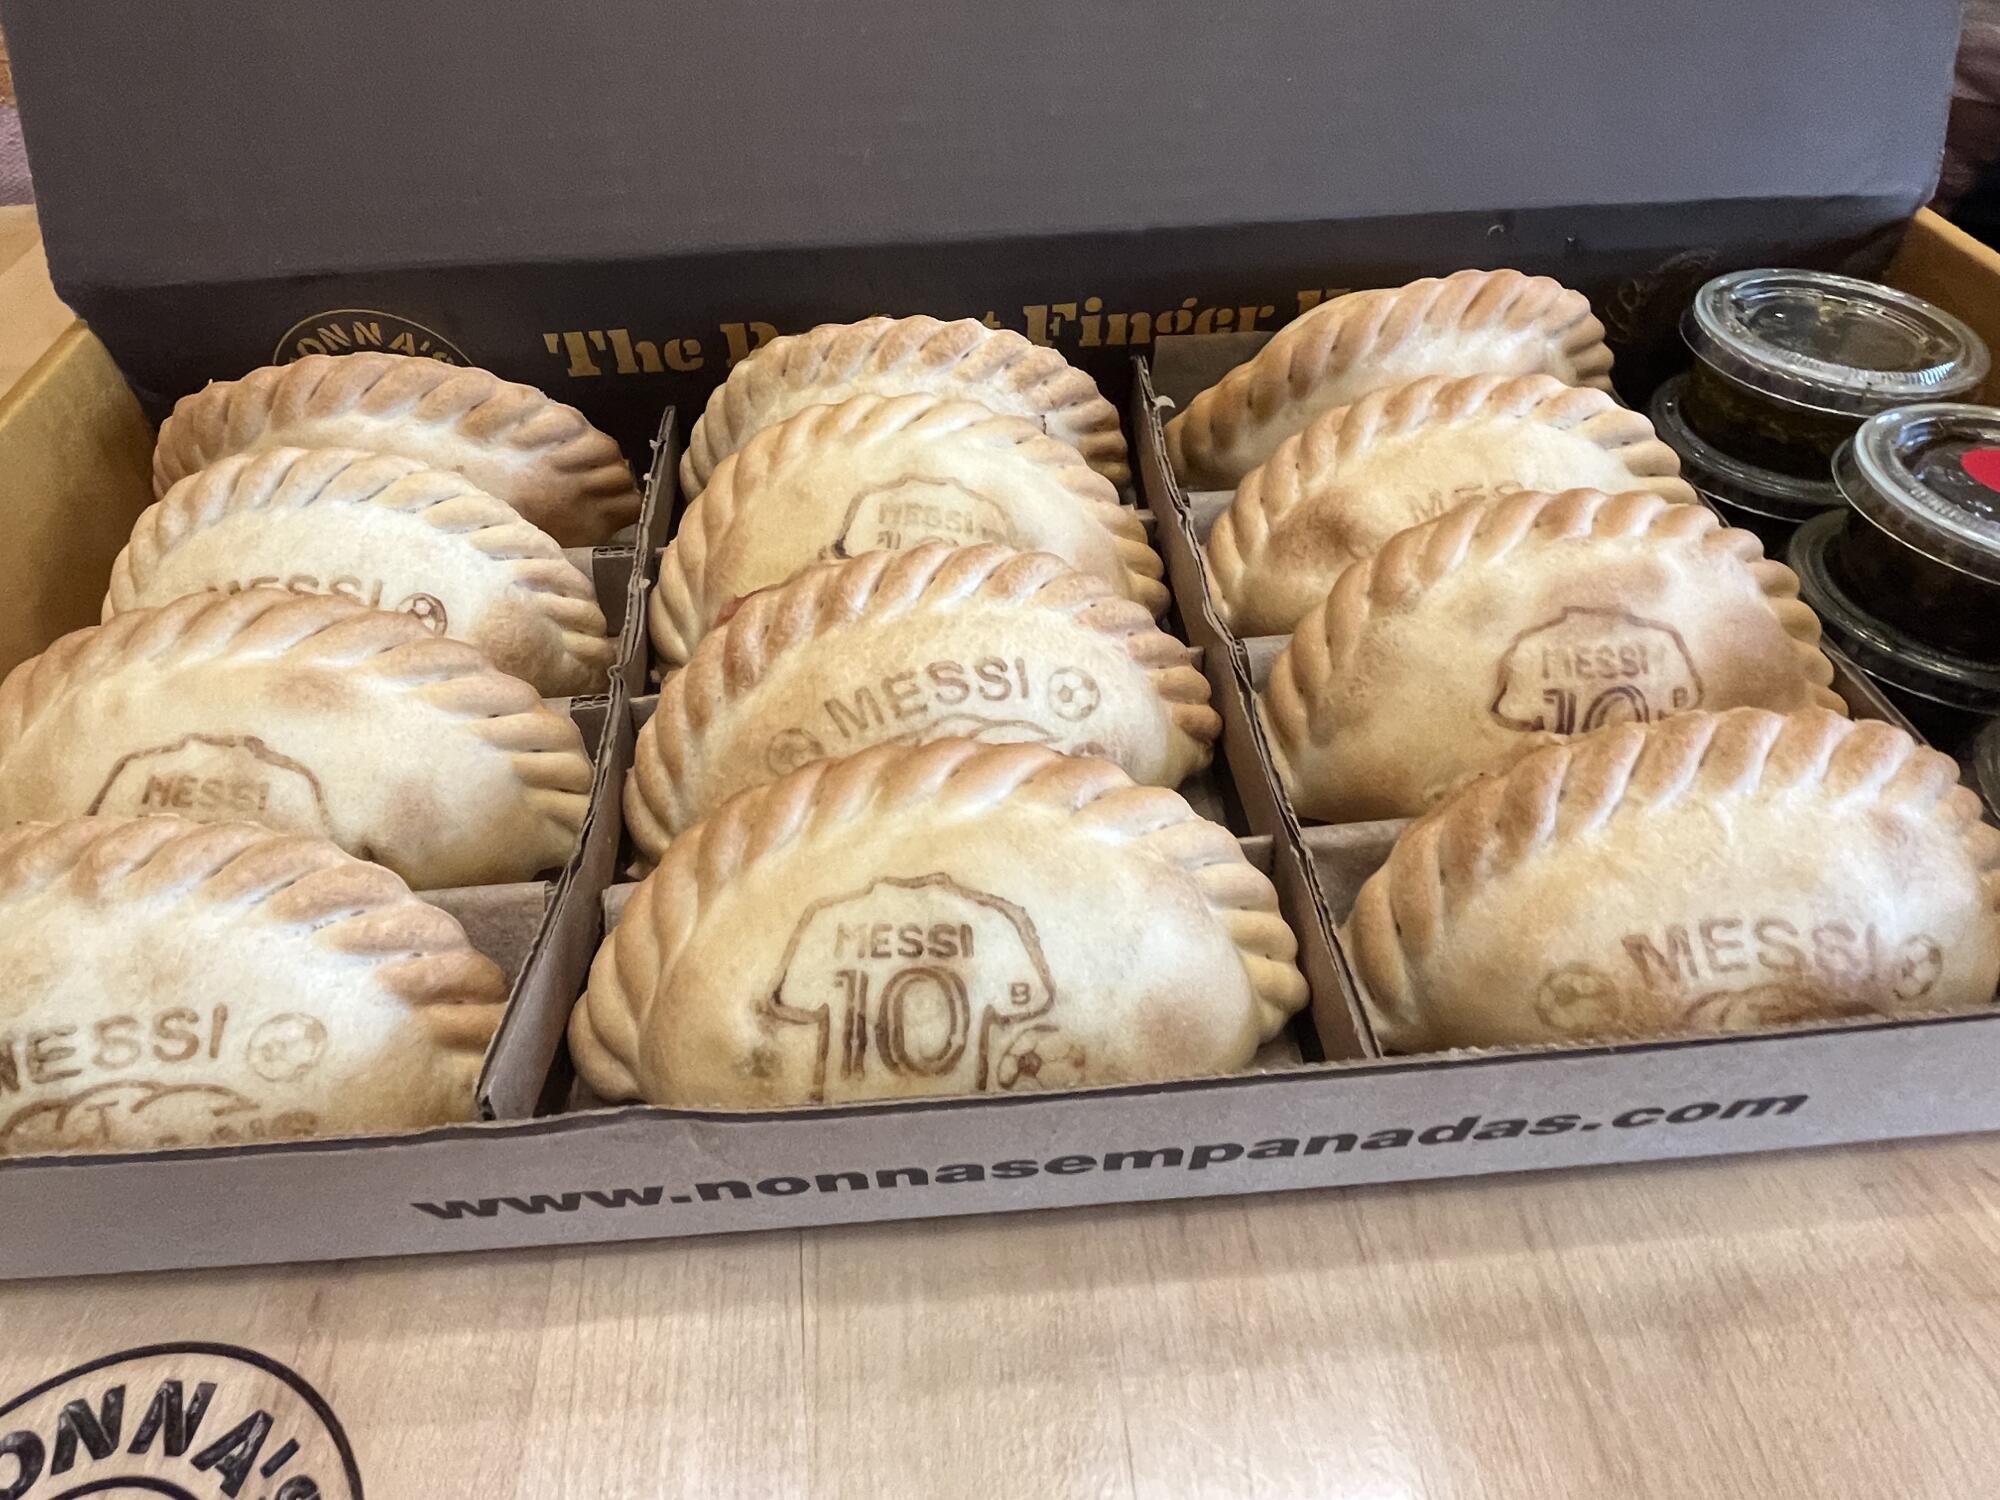 Rows of empanadas emblazoned with the name "Messi'" and images of soccer balls and No. 10 jerseys